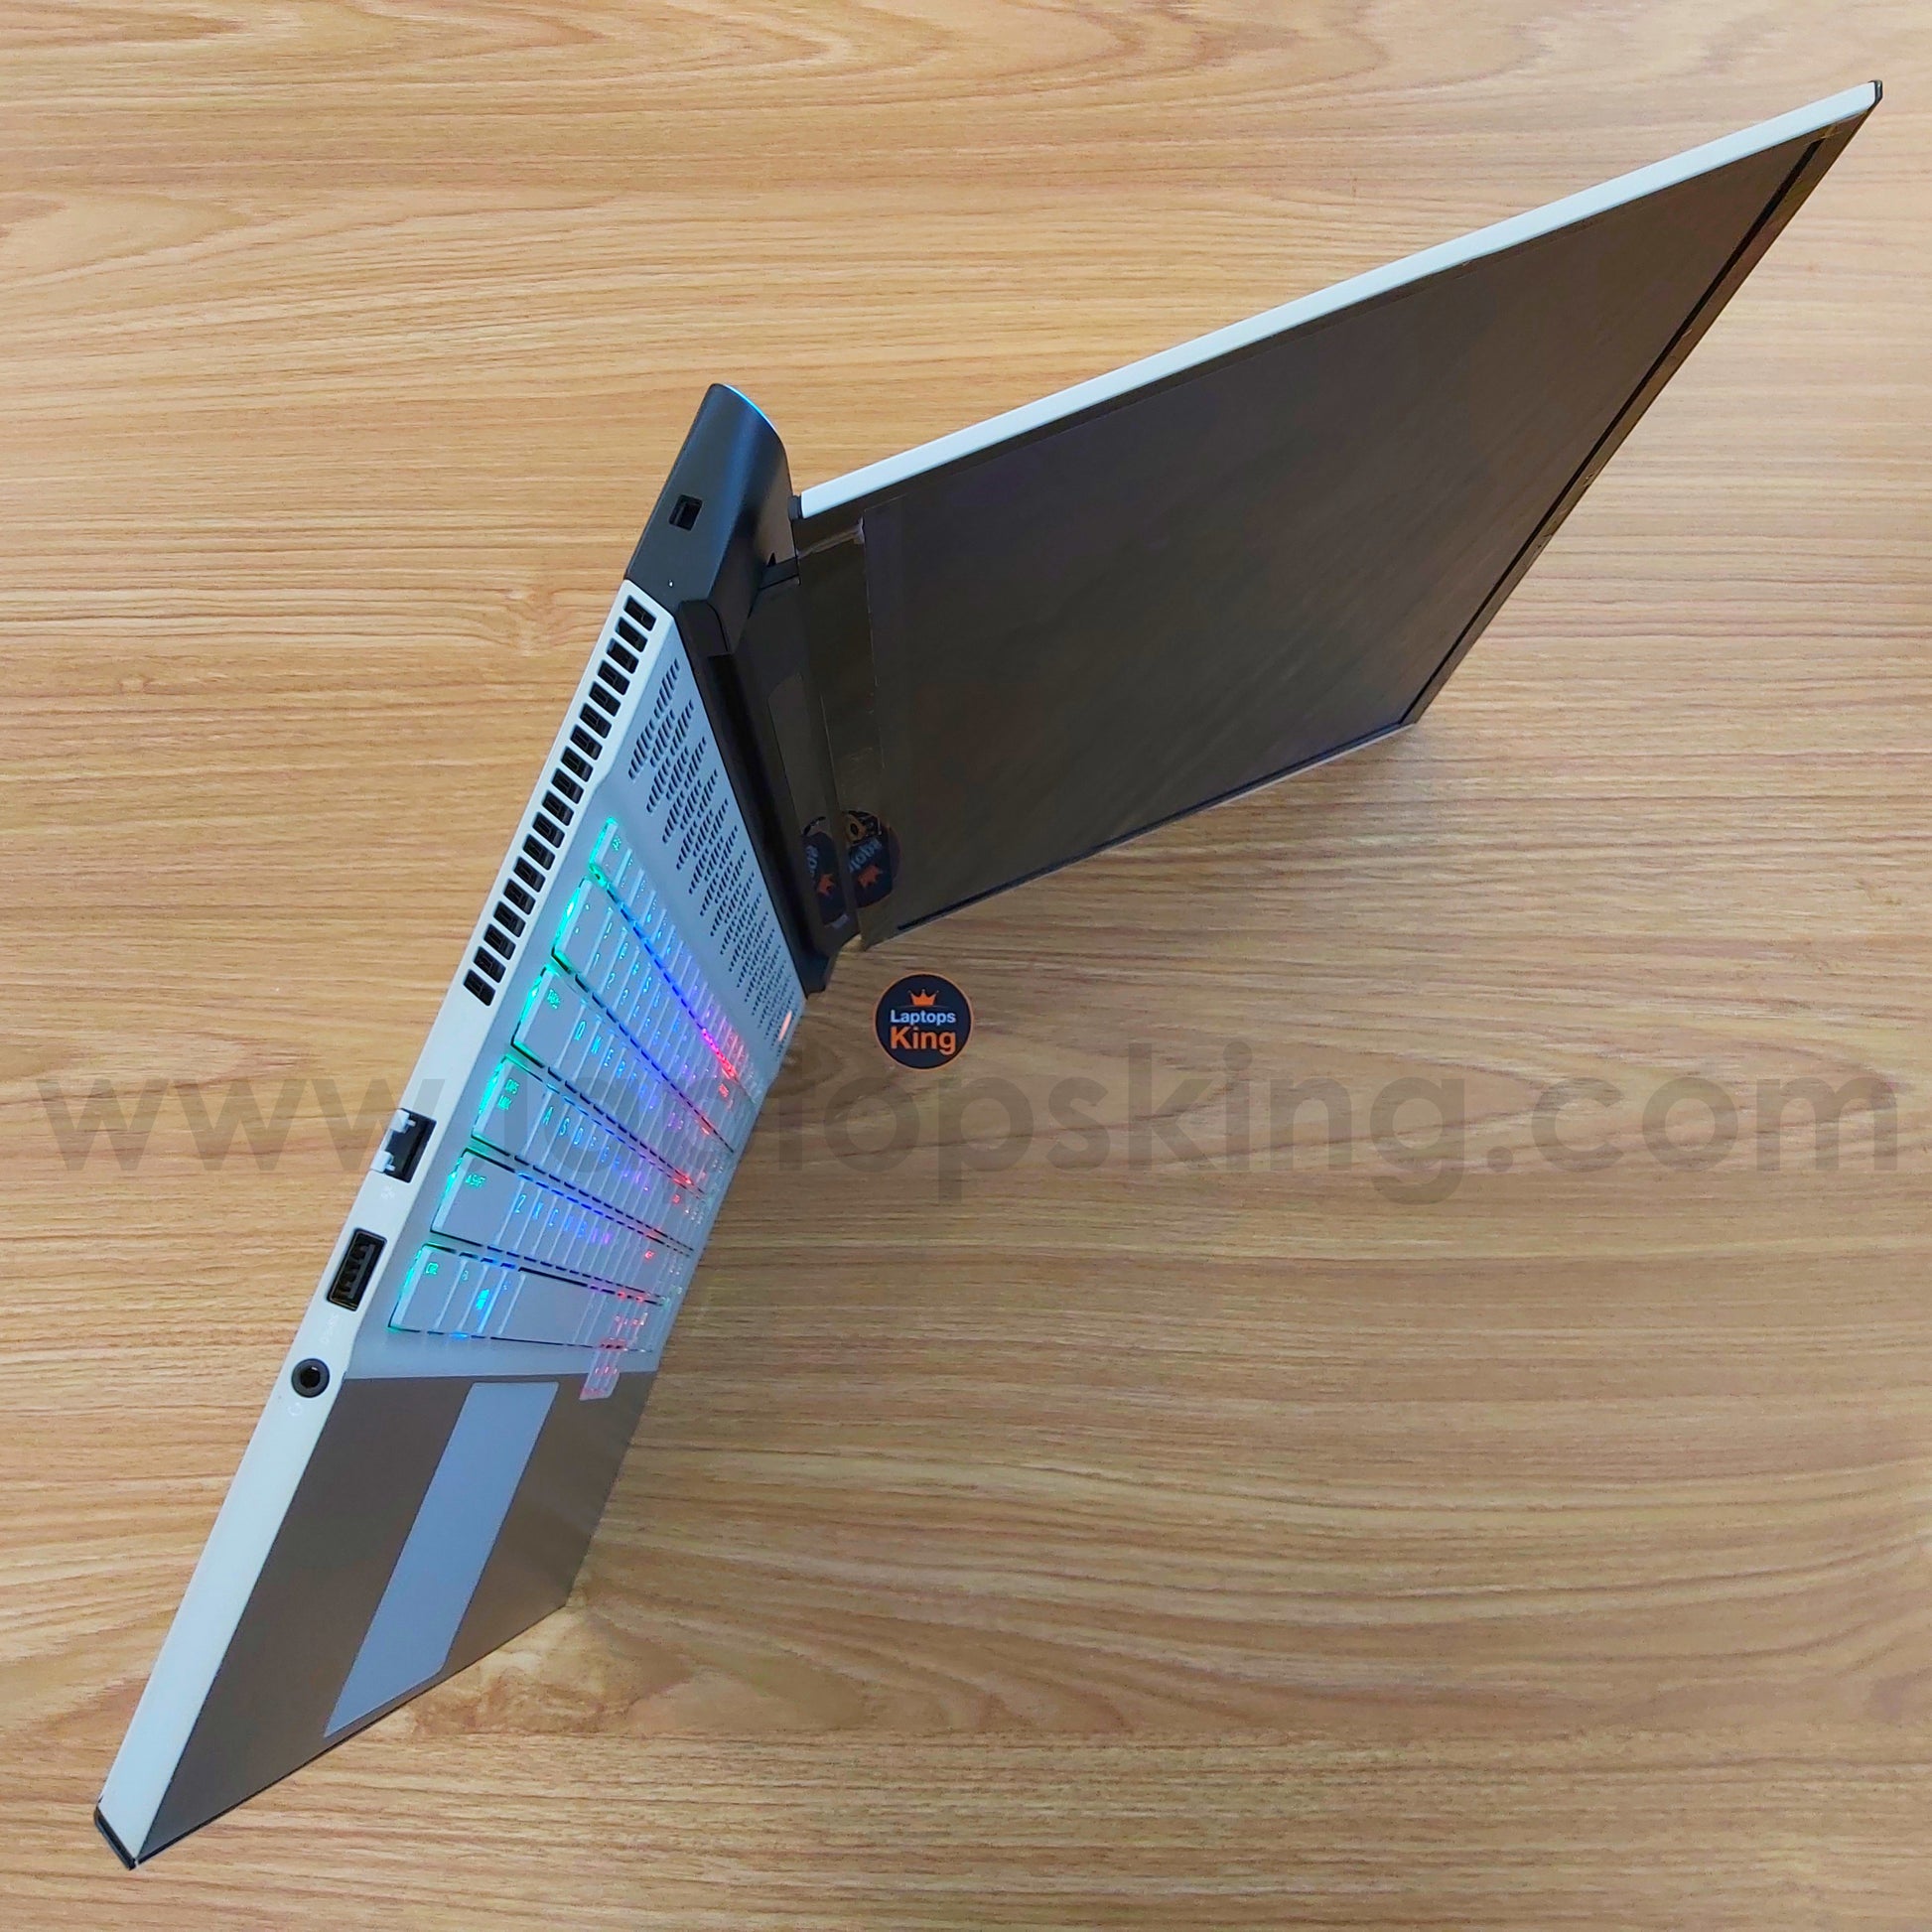 Alienware M17 i9-9980hk RTX 2080 17.3" 144Hz Gaming Laptop (Slightly Used Very Clean) Gaming laptop, Graphic Design laptop, best laptop for gaming, Best laptop for graphic design, computer for sale Lebanon, laptop for video editing in Lebanon, laptop for sale Lebanon, Best graphic design laptop,	Best video editing laptop, Best programming laptop, laptop for sale in Lebanon, laptops for sale in Lebanon, laptop for sale in Lebanon, buy computer Lebanon, buy laptop Lebanon.